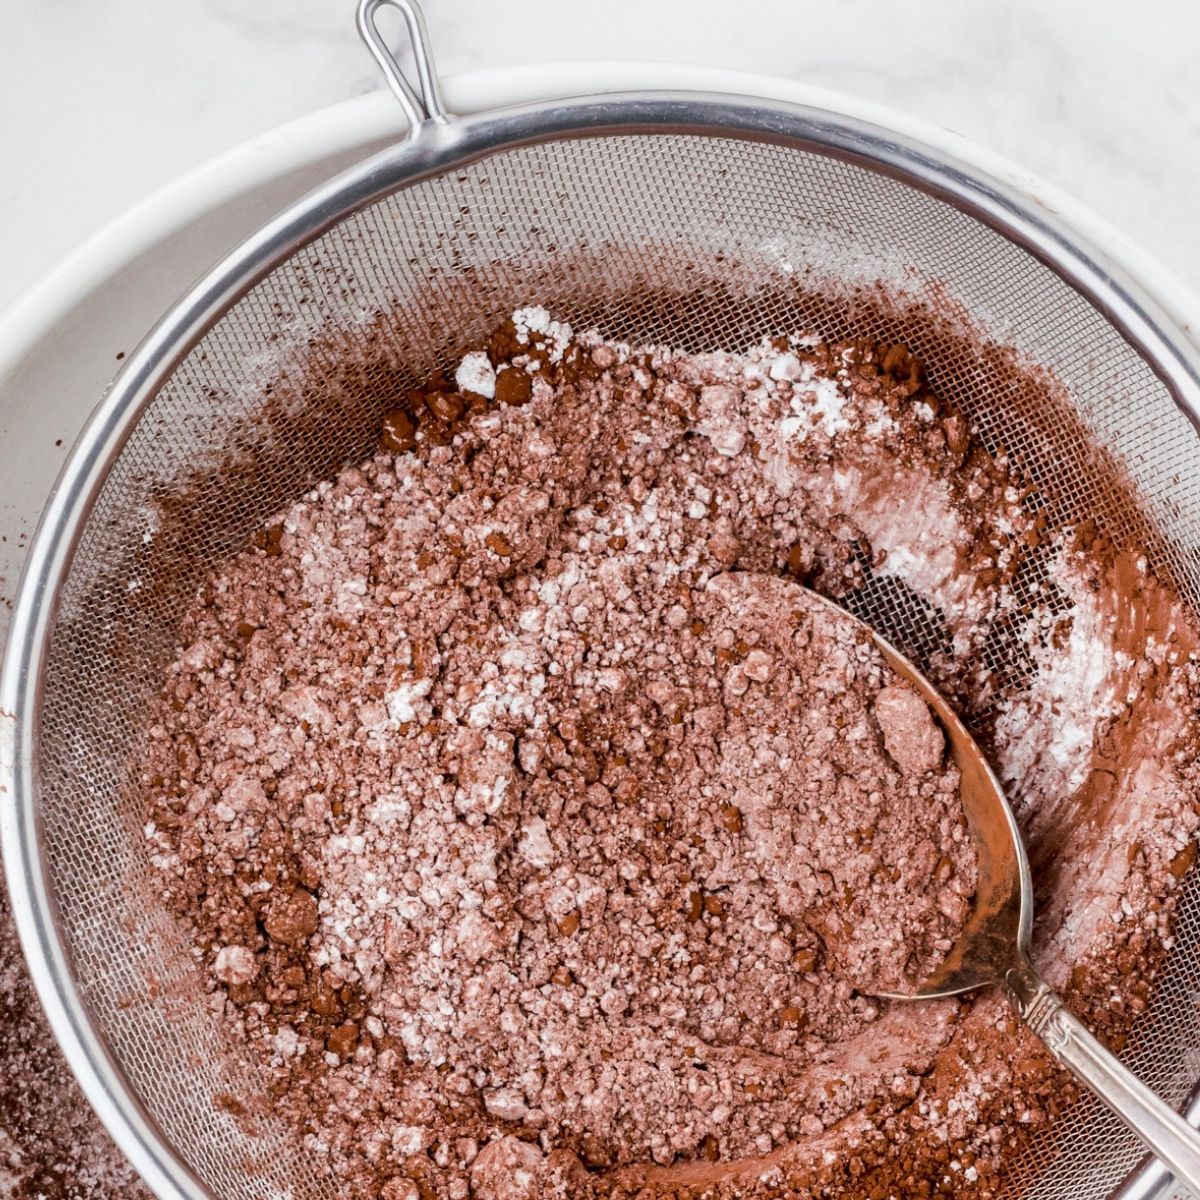 How to Sift Flour Without a Sifter